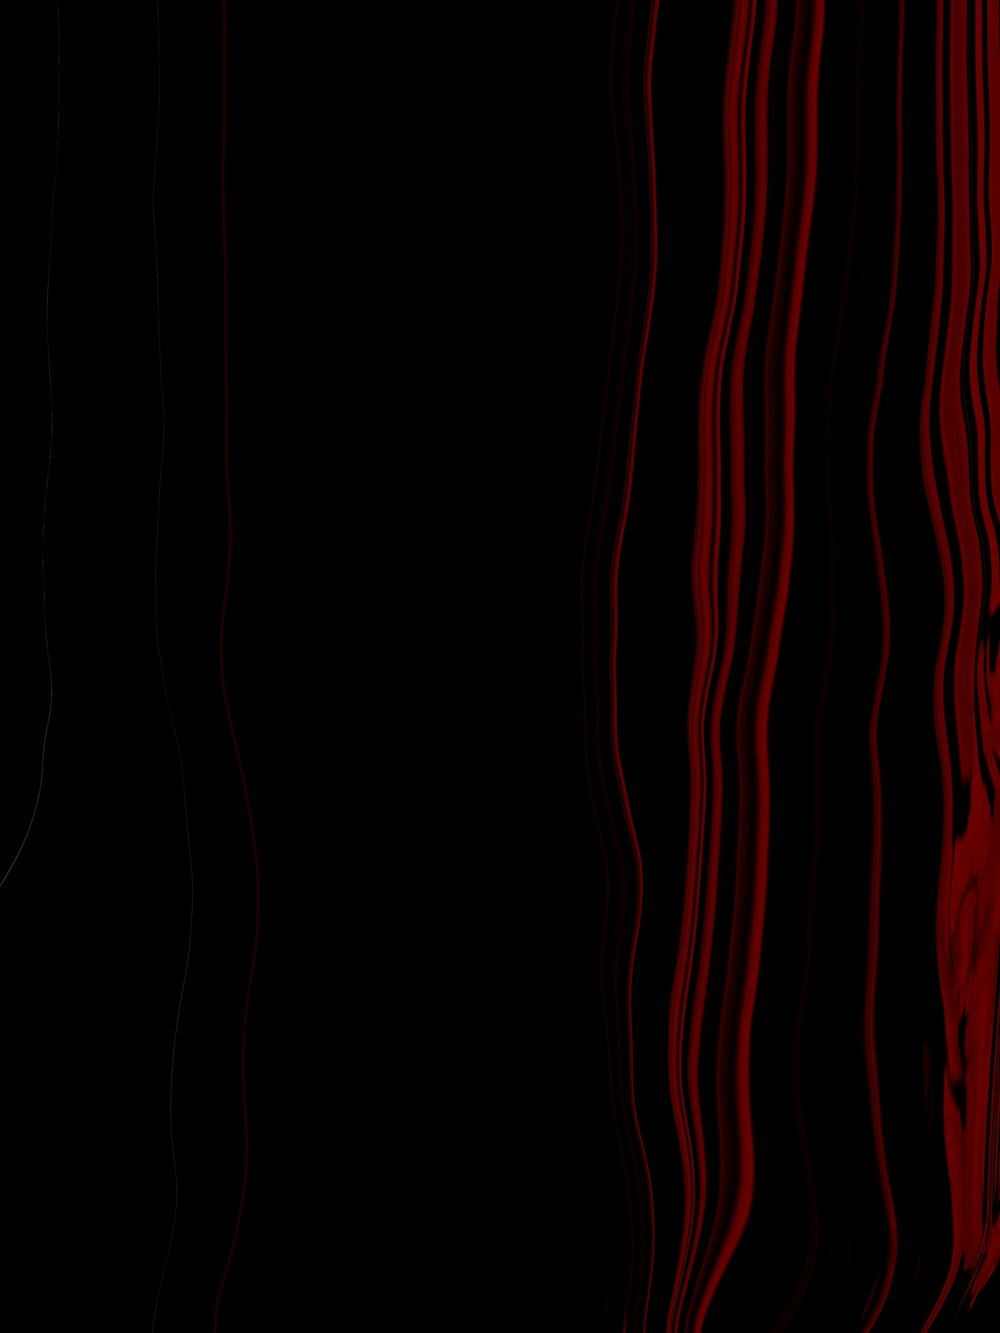 a black and red background with vertical lines